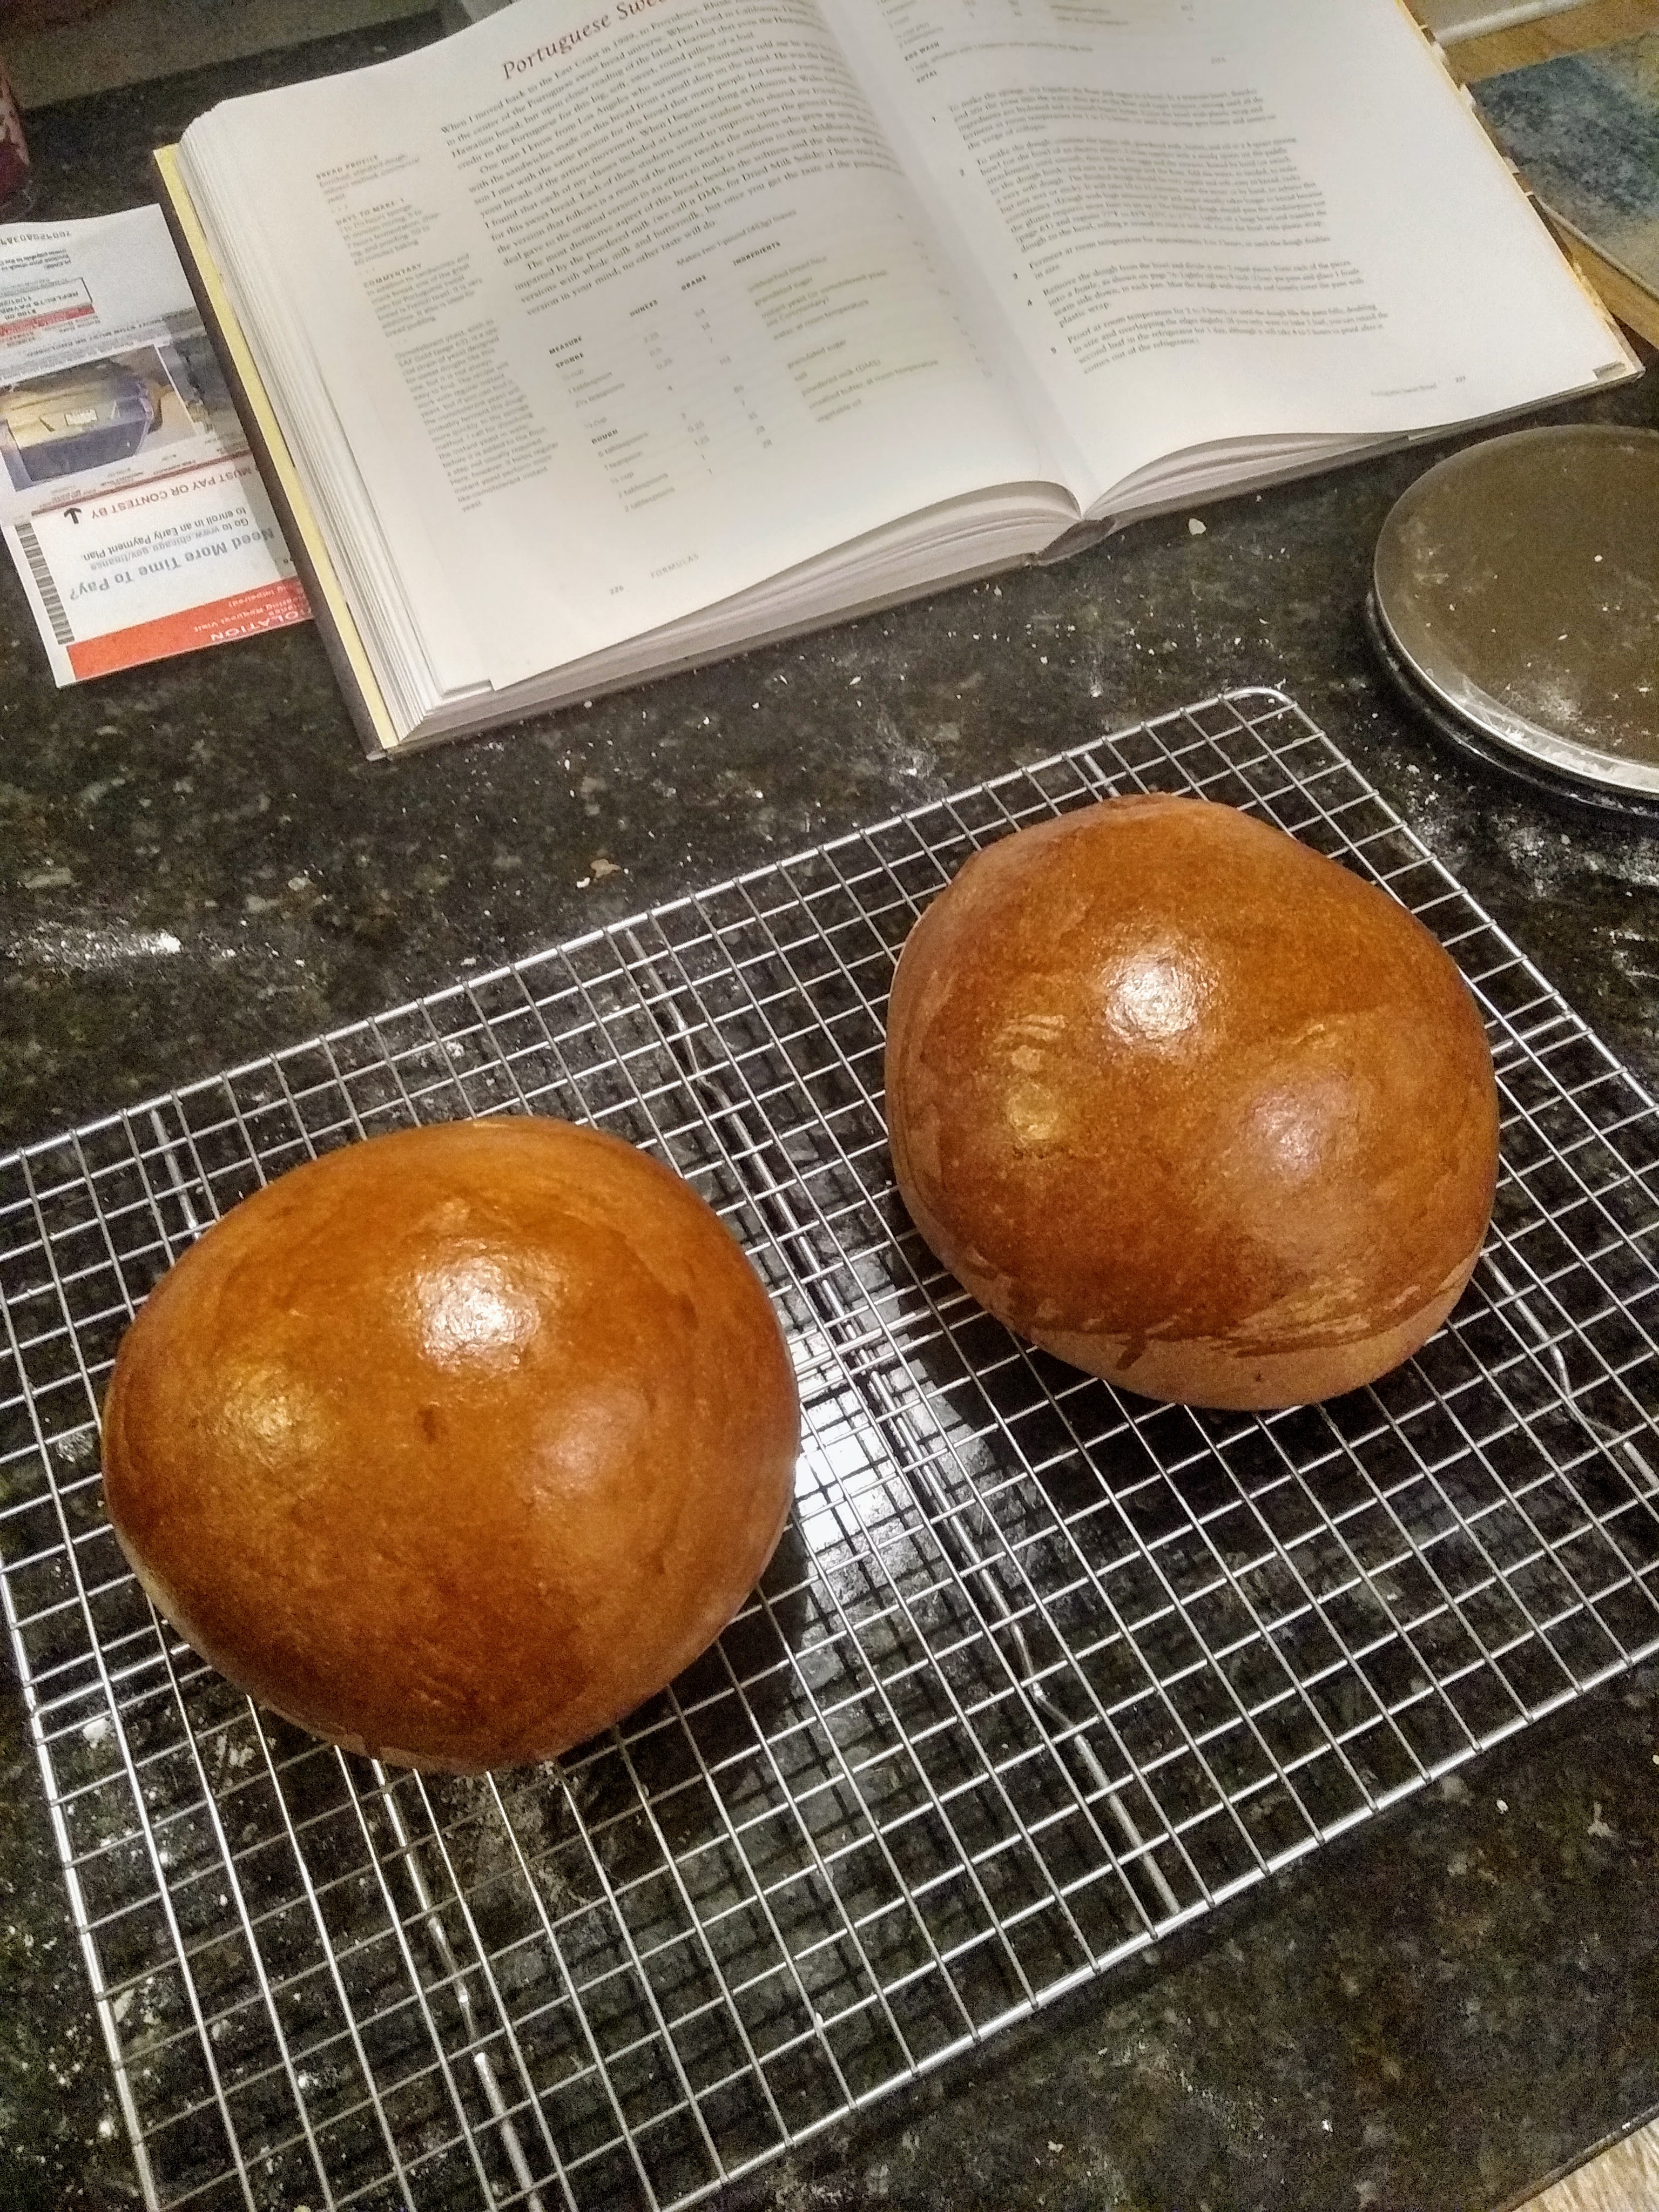 Two mahogany-colored loaves of Portugese sweet bread